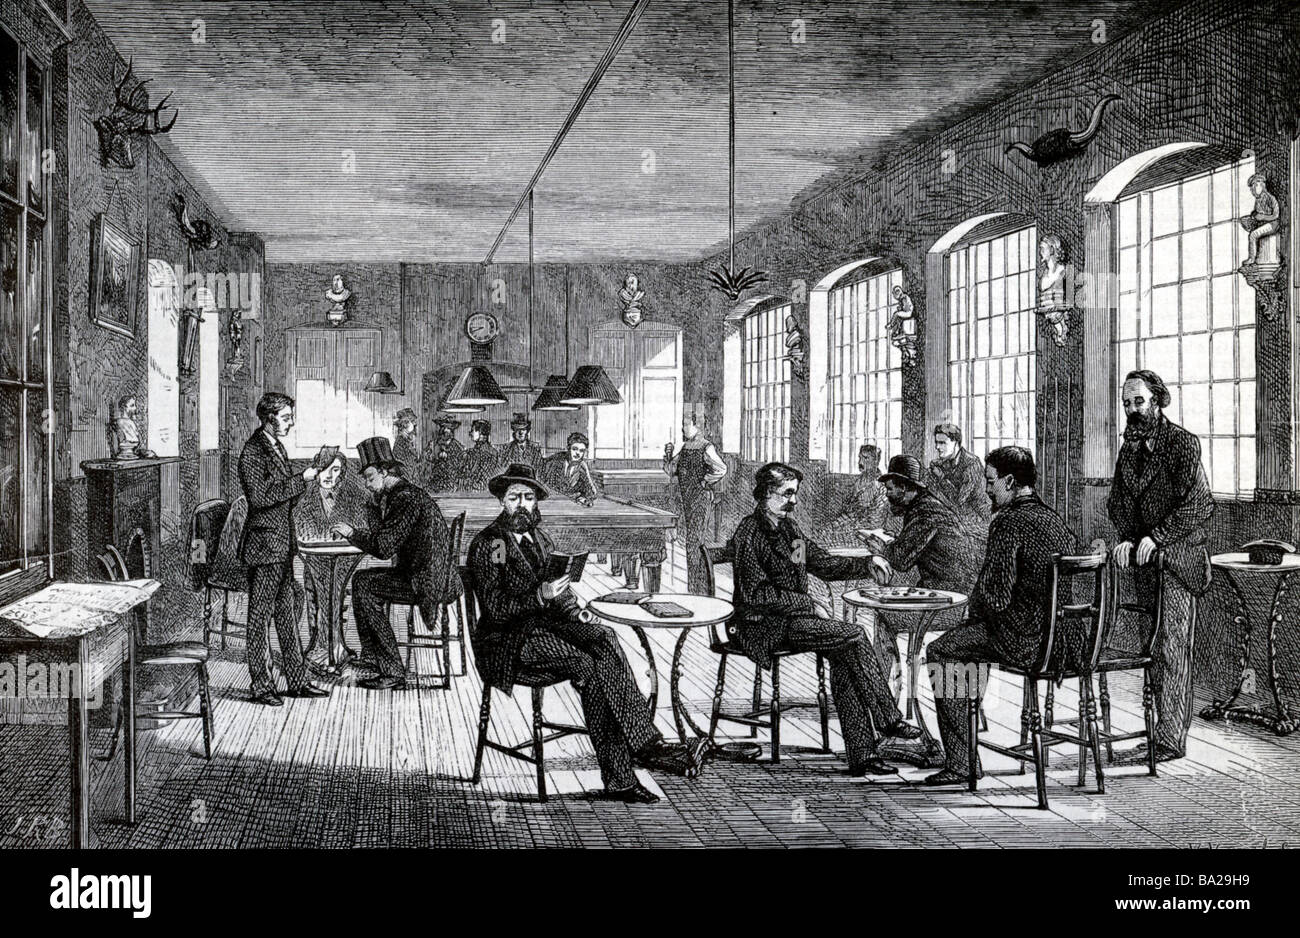 ENGLISH WORKING MENS CLUB shown in an 1870 engraving Stock Photo